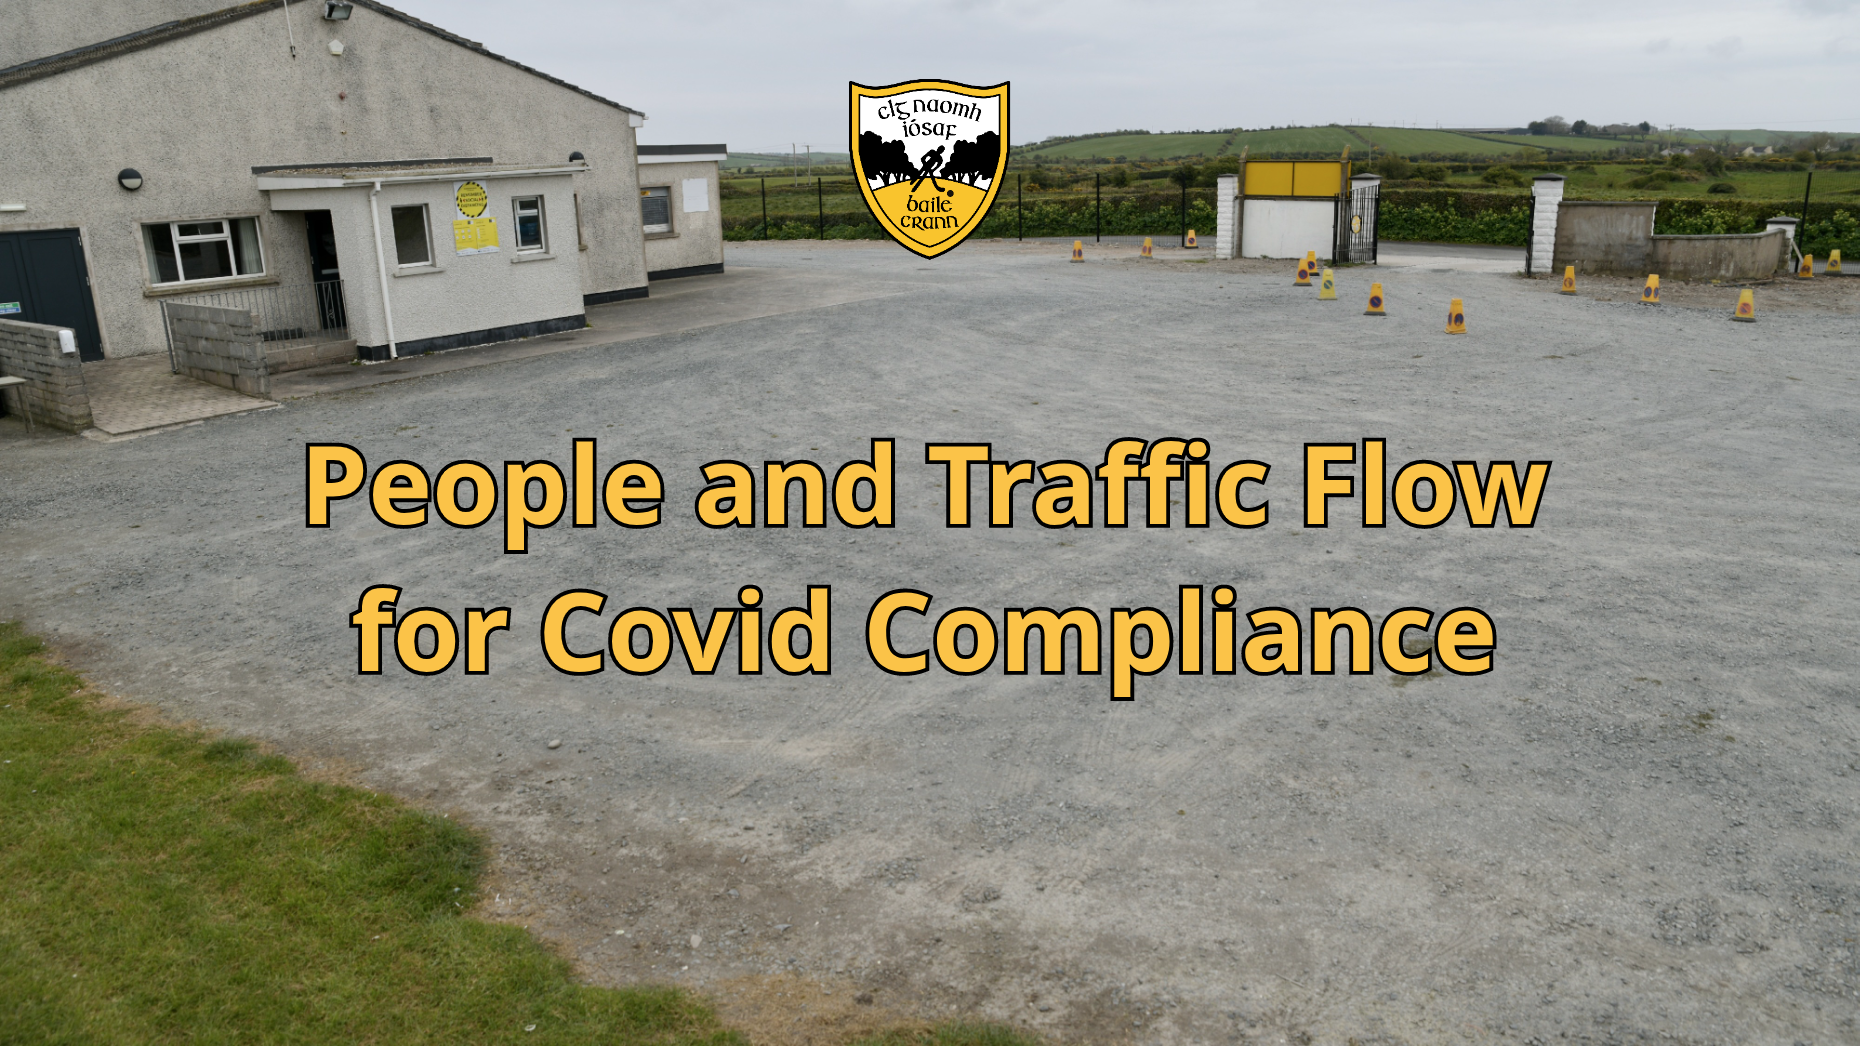 UPDATE – People and Traffic flow at McKenna Park for Covid compliance